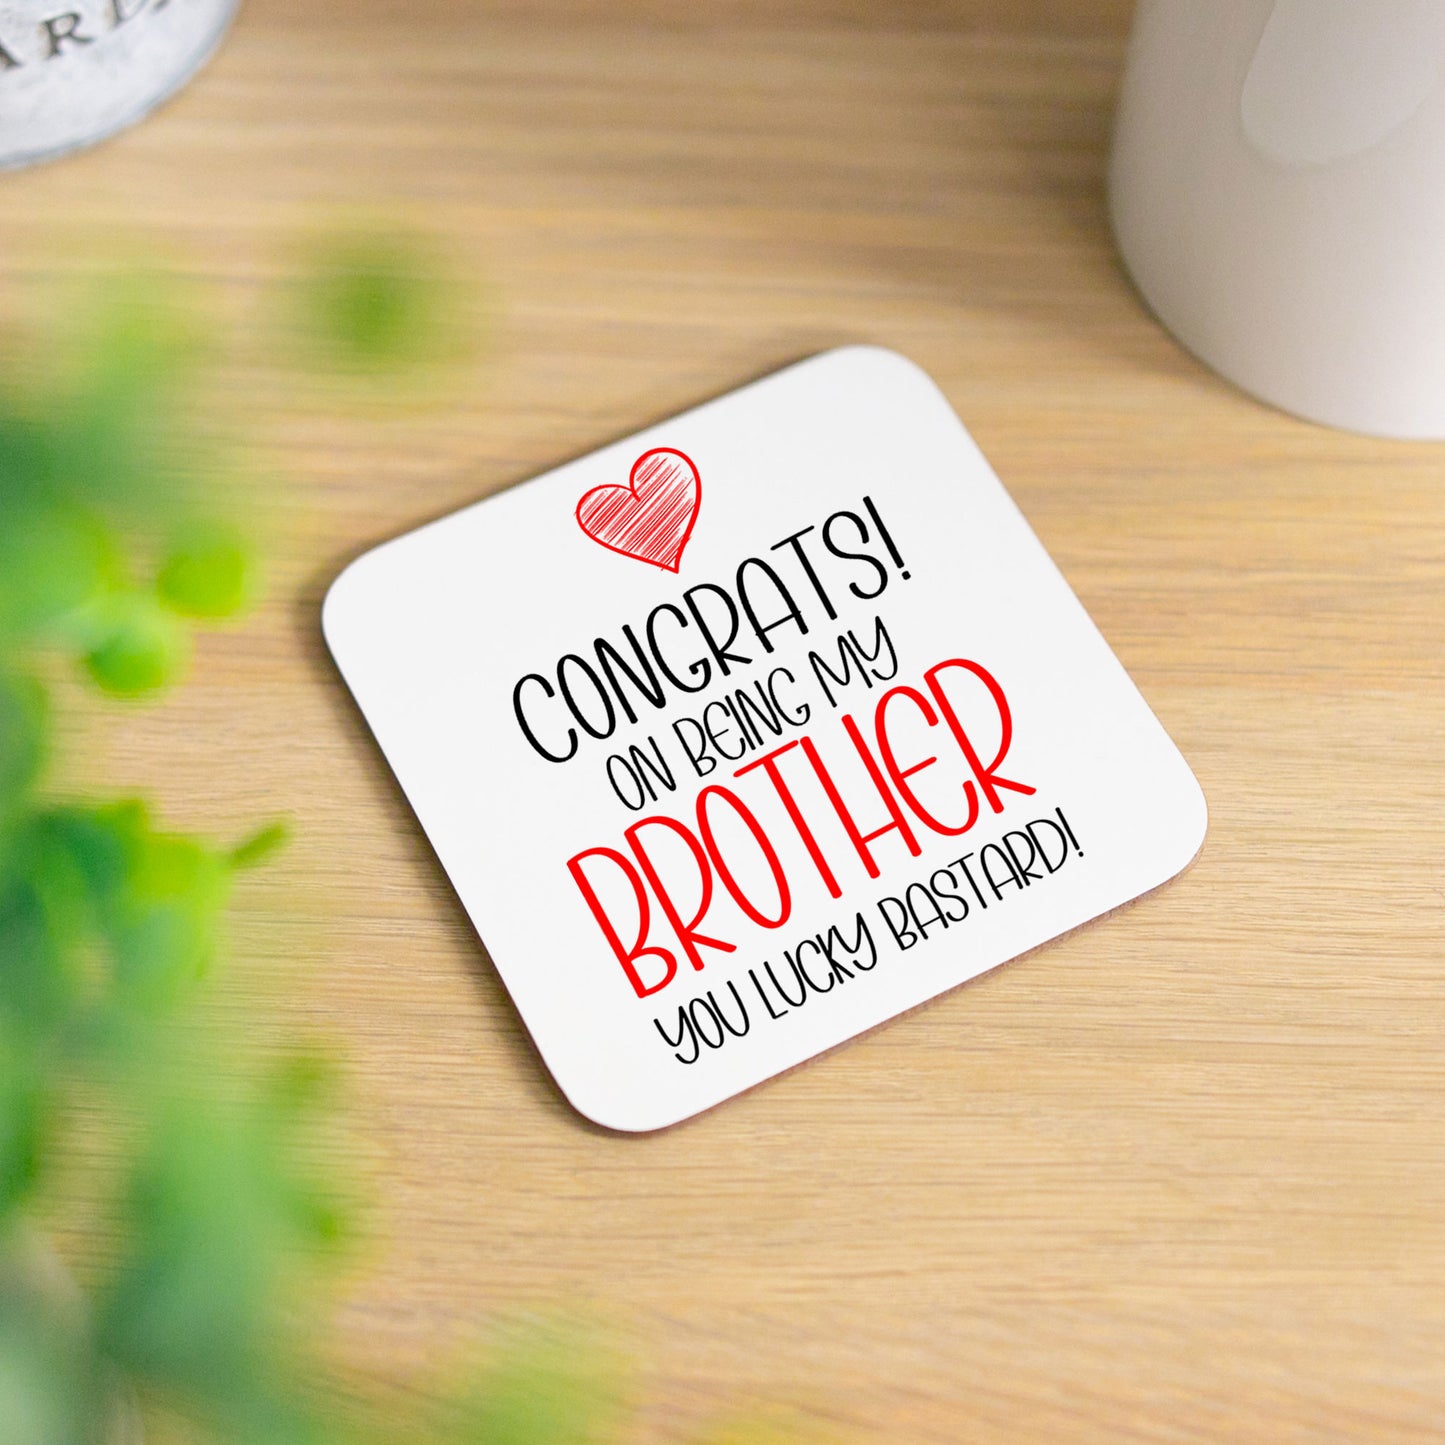 Congrats On Being My Brother Mug and/or Coaster Gift  - Always Looking Good - Lucky Bastard Coaster On Its Own  